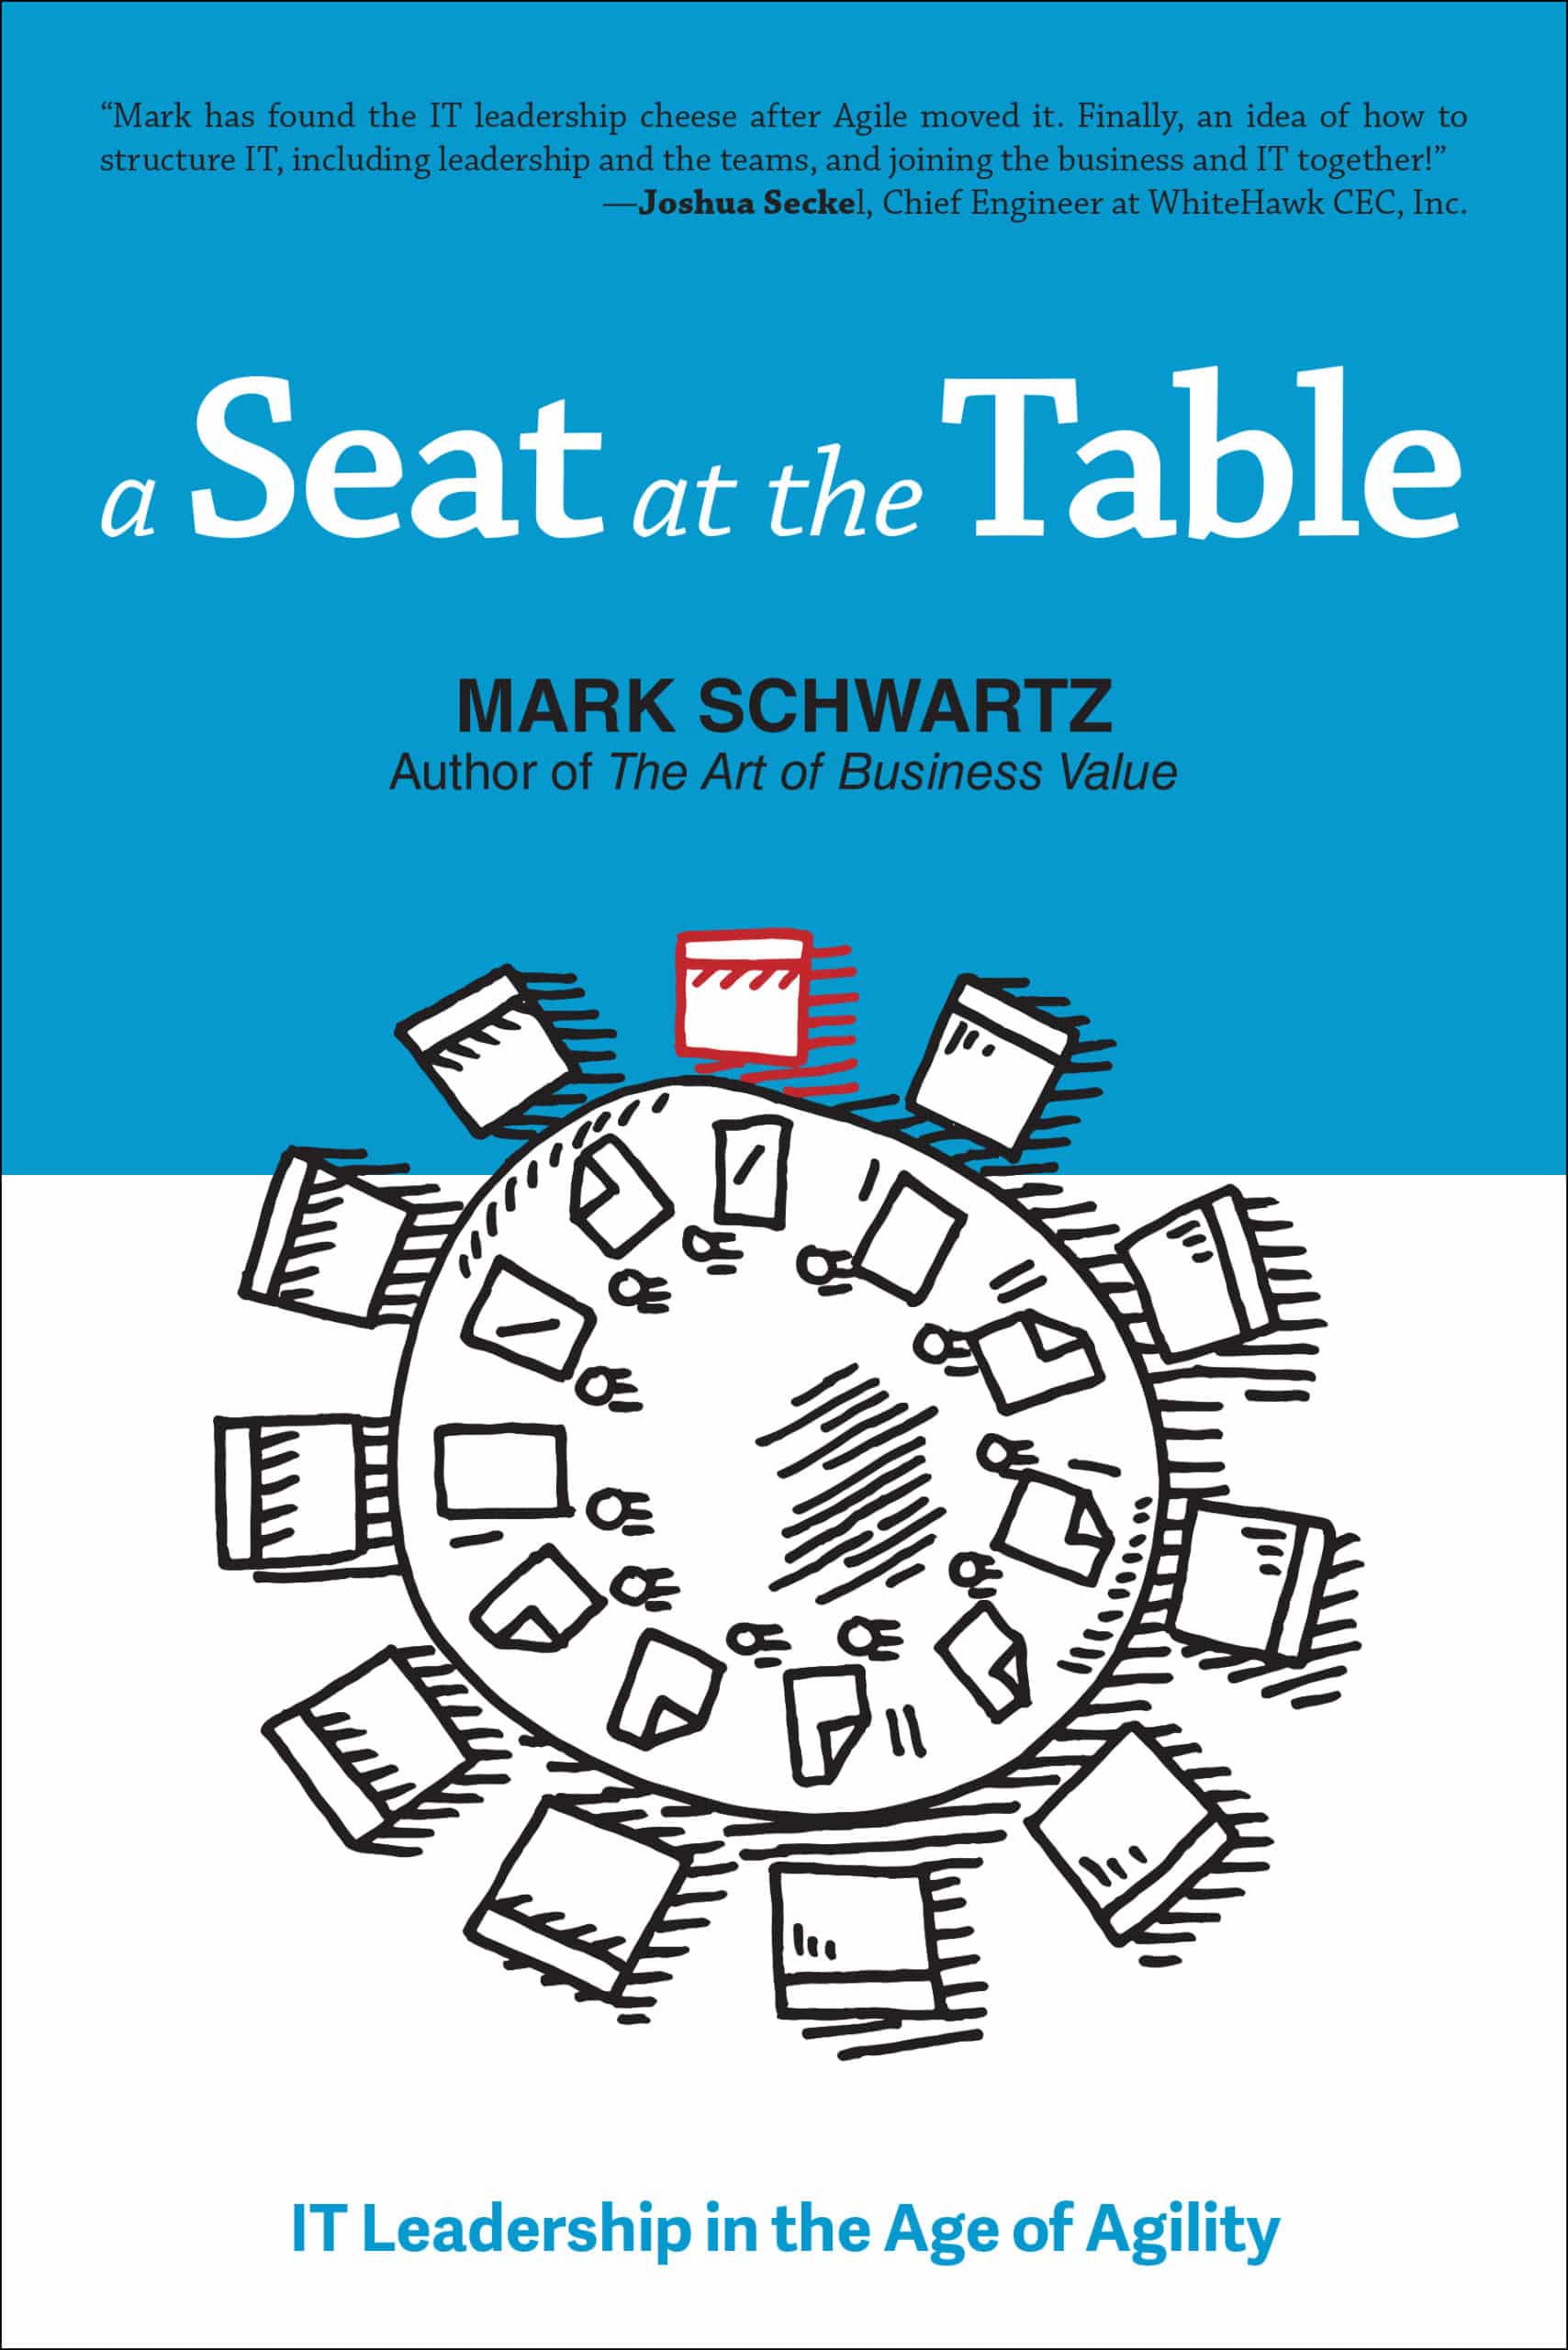 Cover of A Seat at the Table: IT Leadership in the Age of Agility by Mark Schwartz, looking at transformation and change in an Agile context.